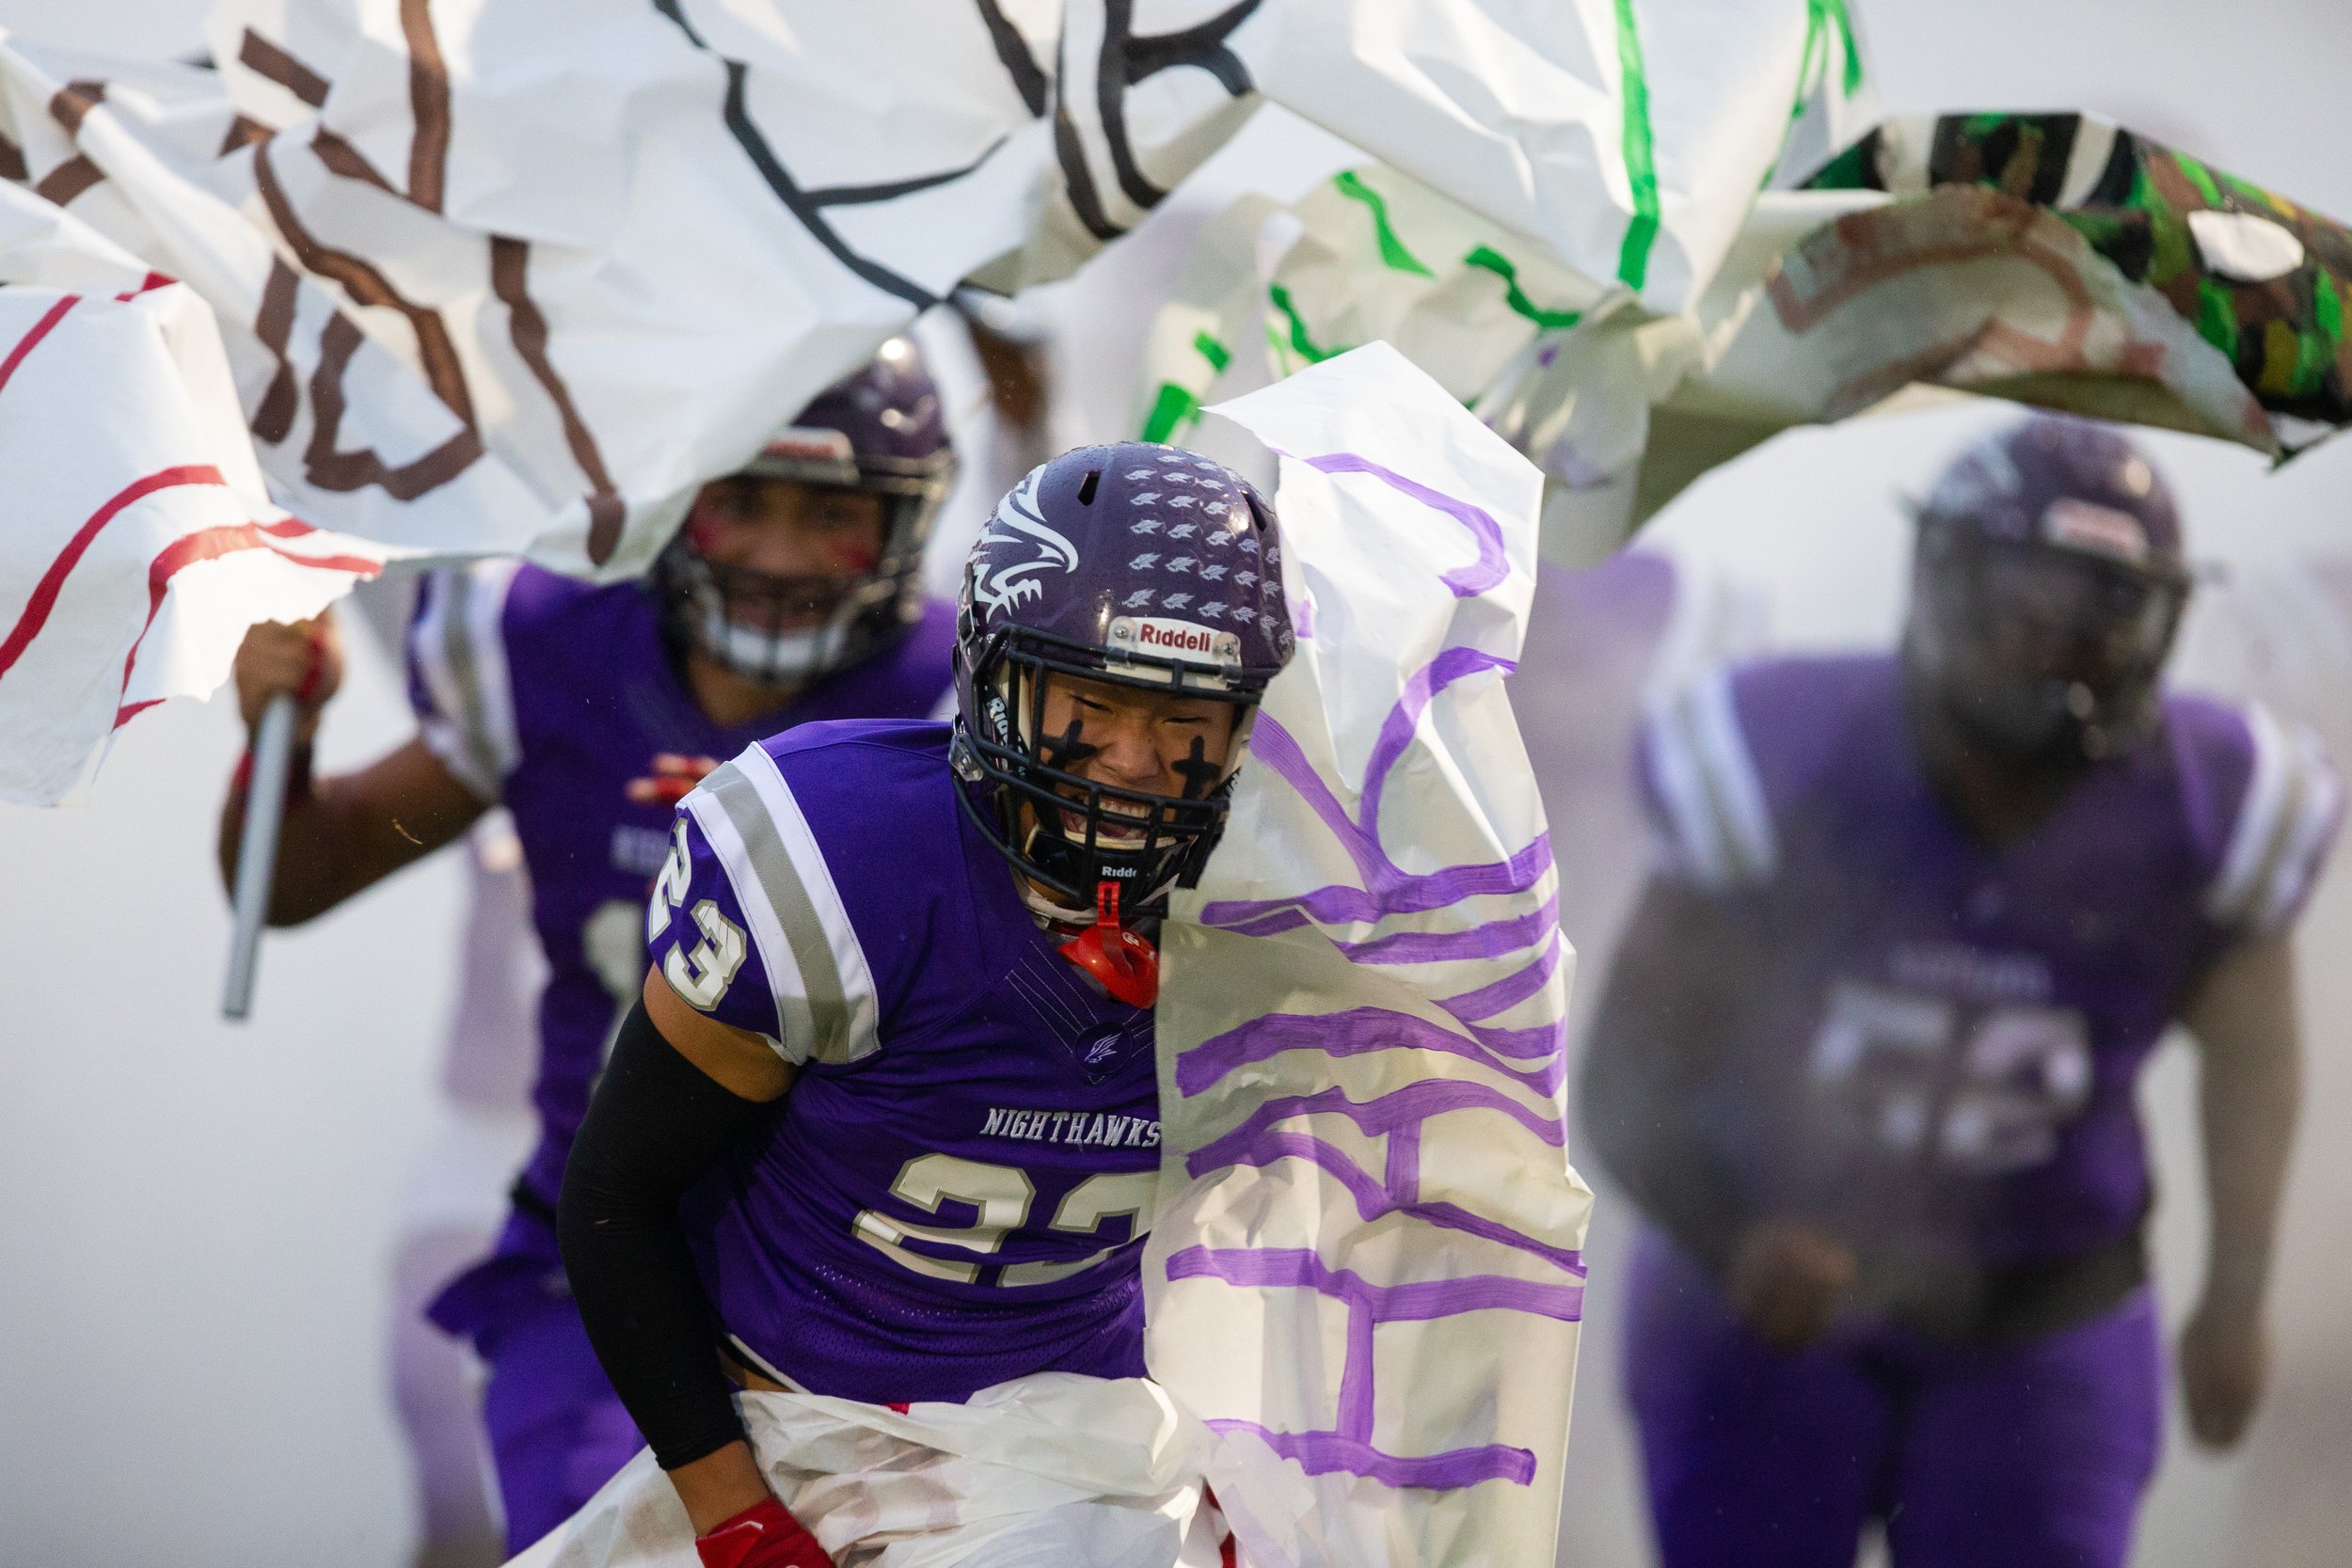  Northern's Carston Lee breaks through a paper banner as the Northern football team takes the field before the game against Northwest at Northern Guilford High School in Greensboro, N.C., on Friday, October 8, 2021.   